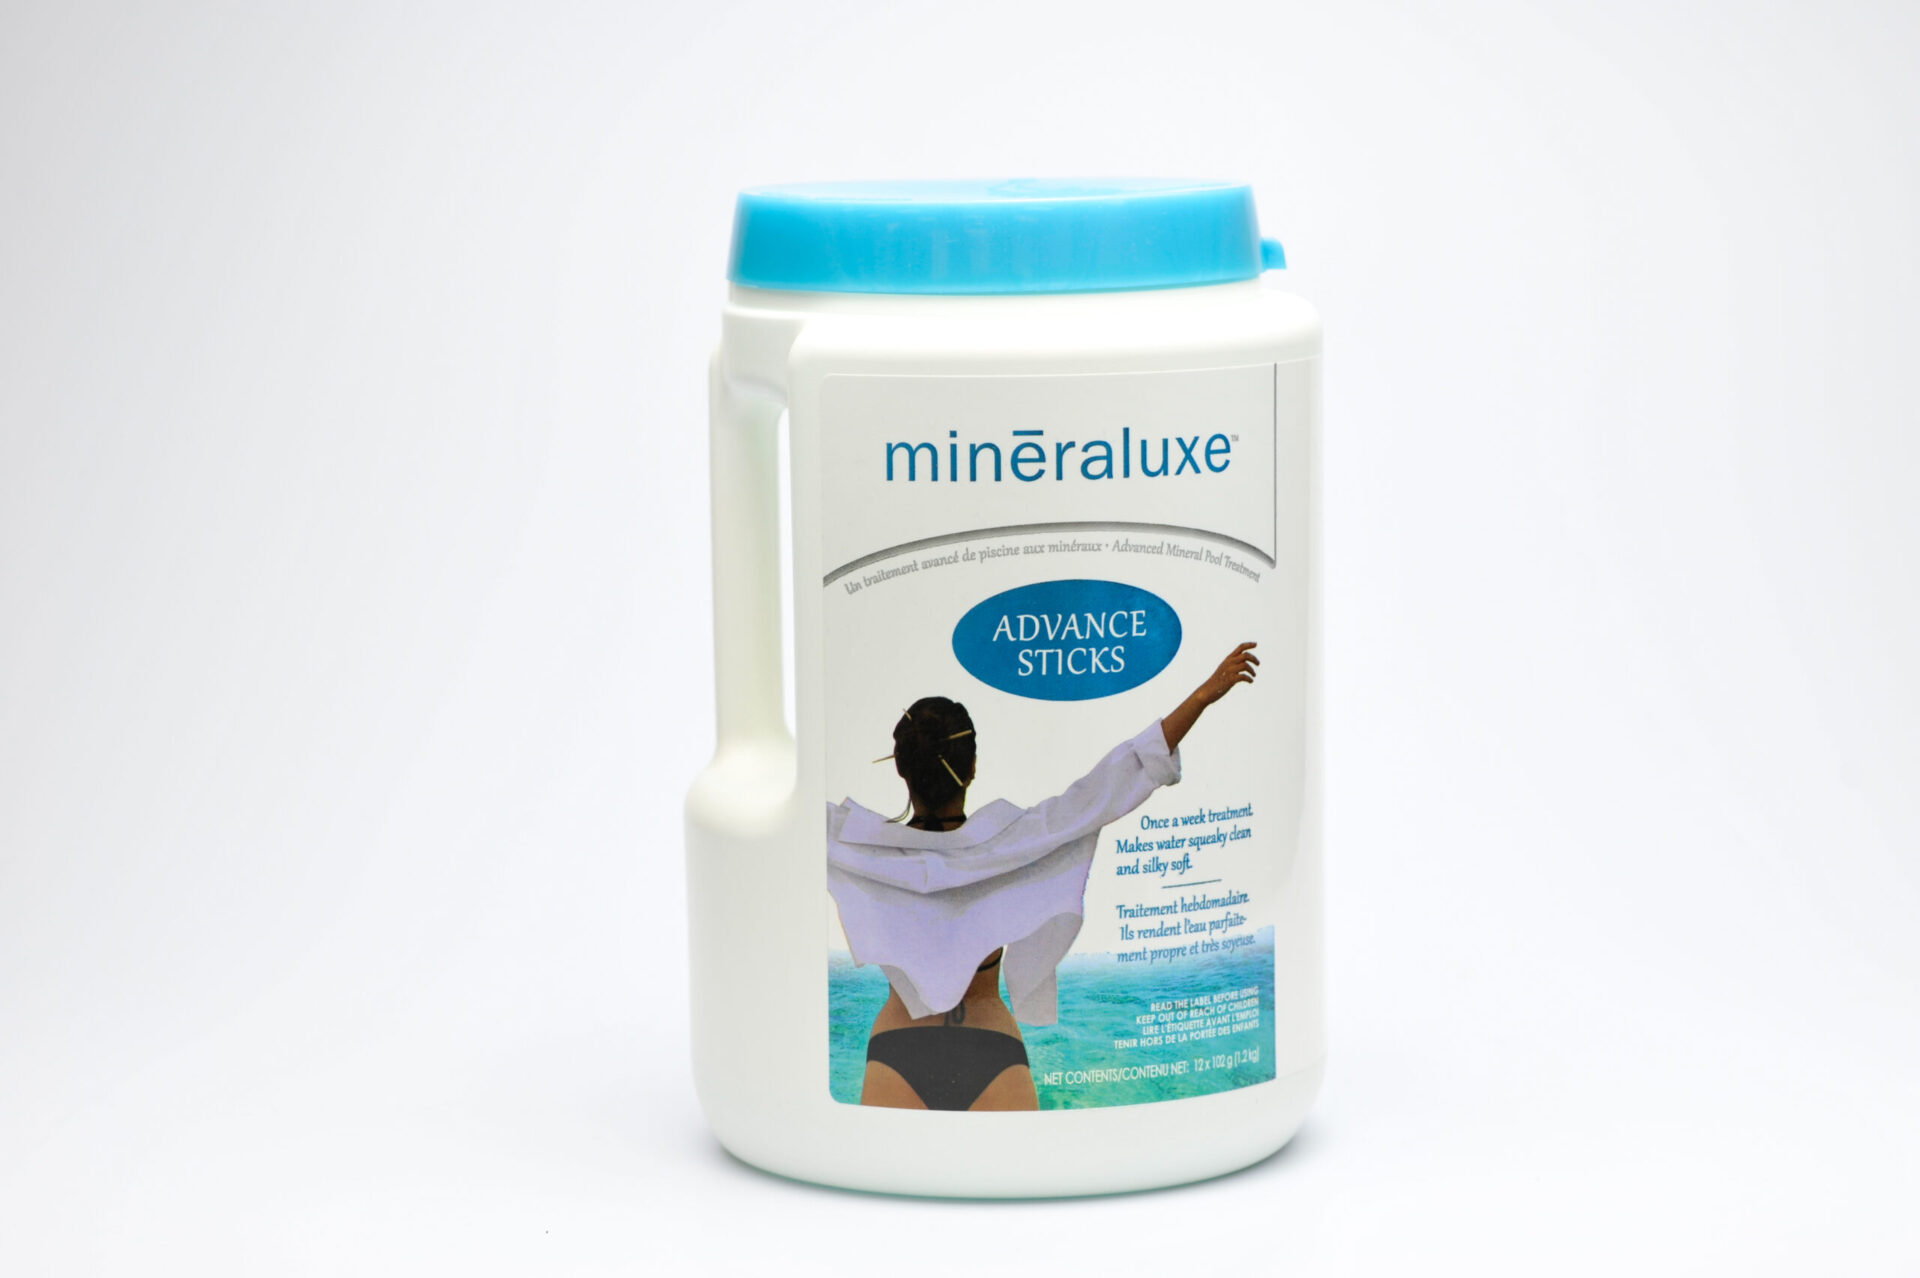 Mineraluxe Advanced Sticks 1.2kg scaled - Mineraluxe Advanced Sticks 1.2kg